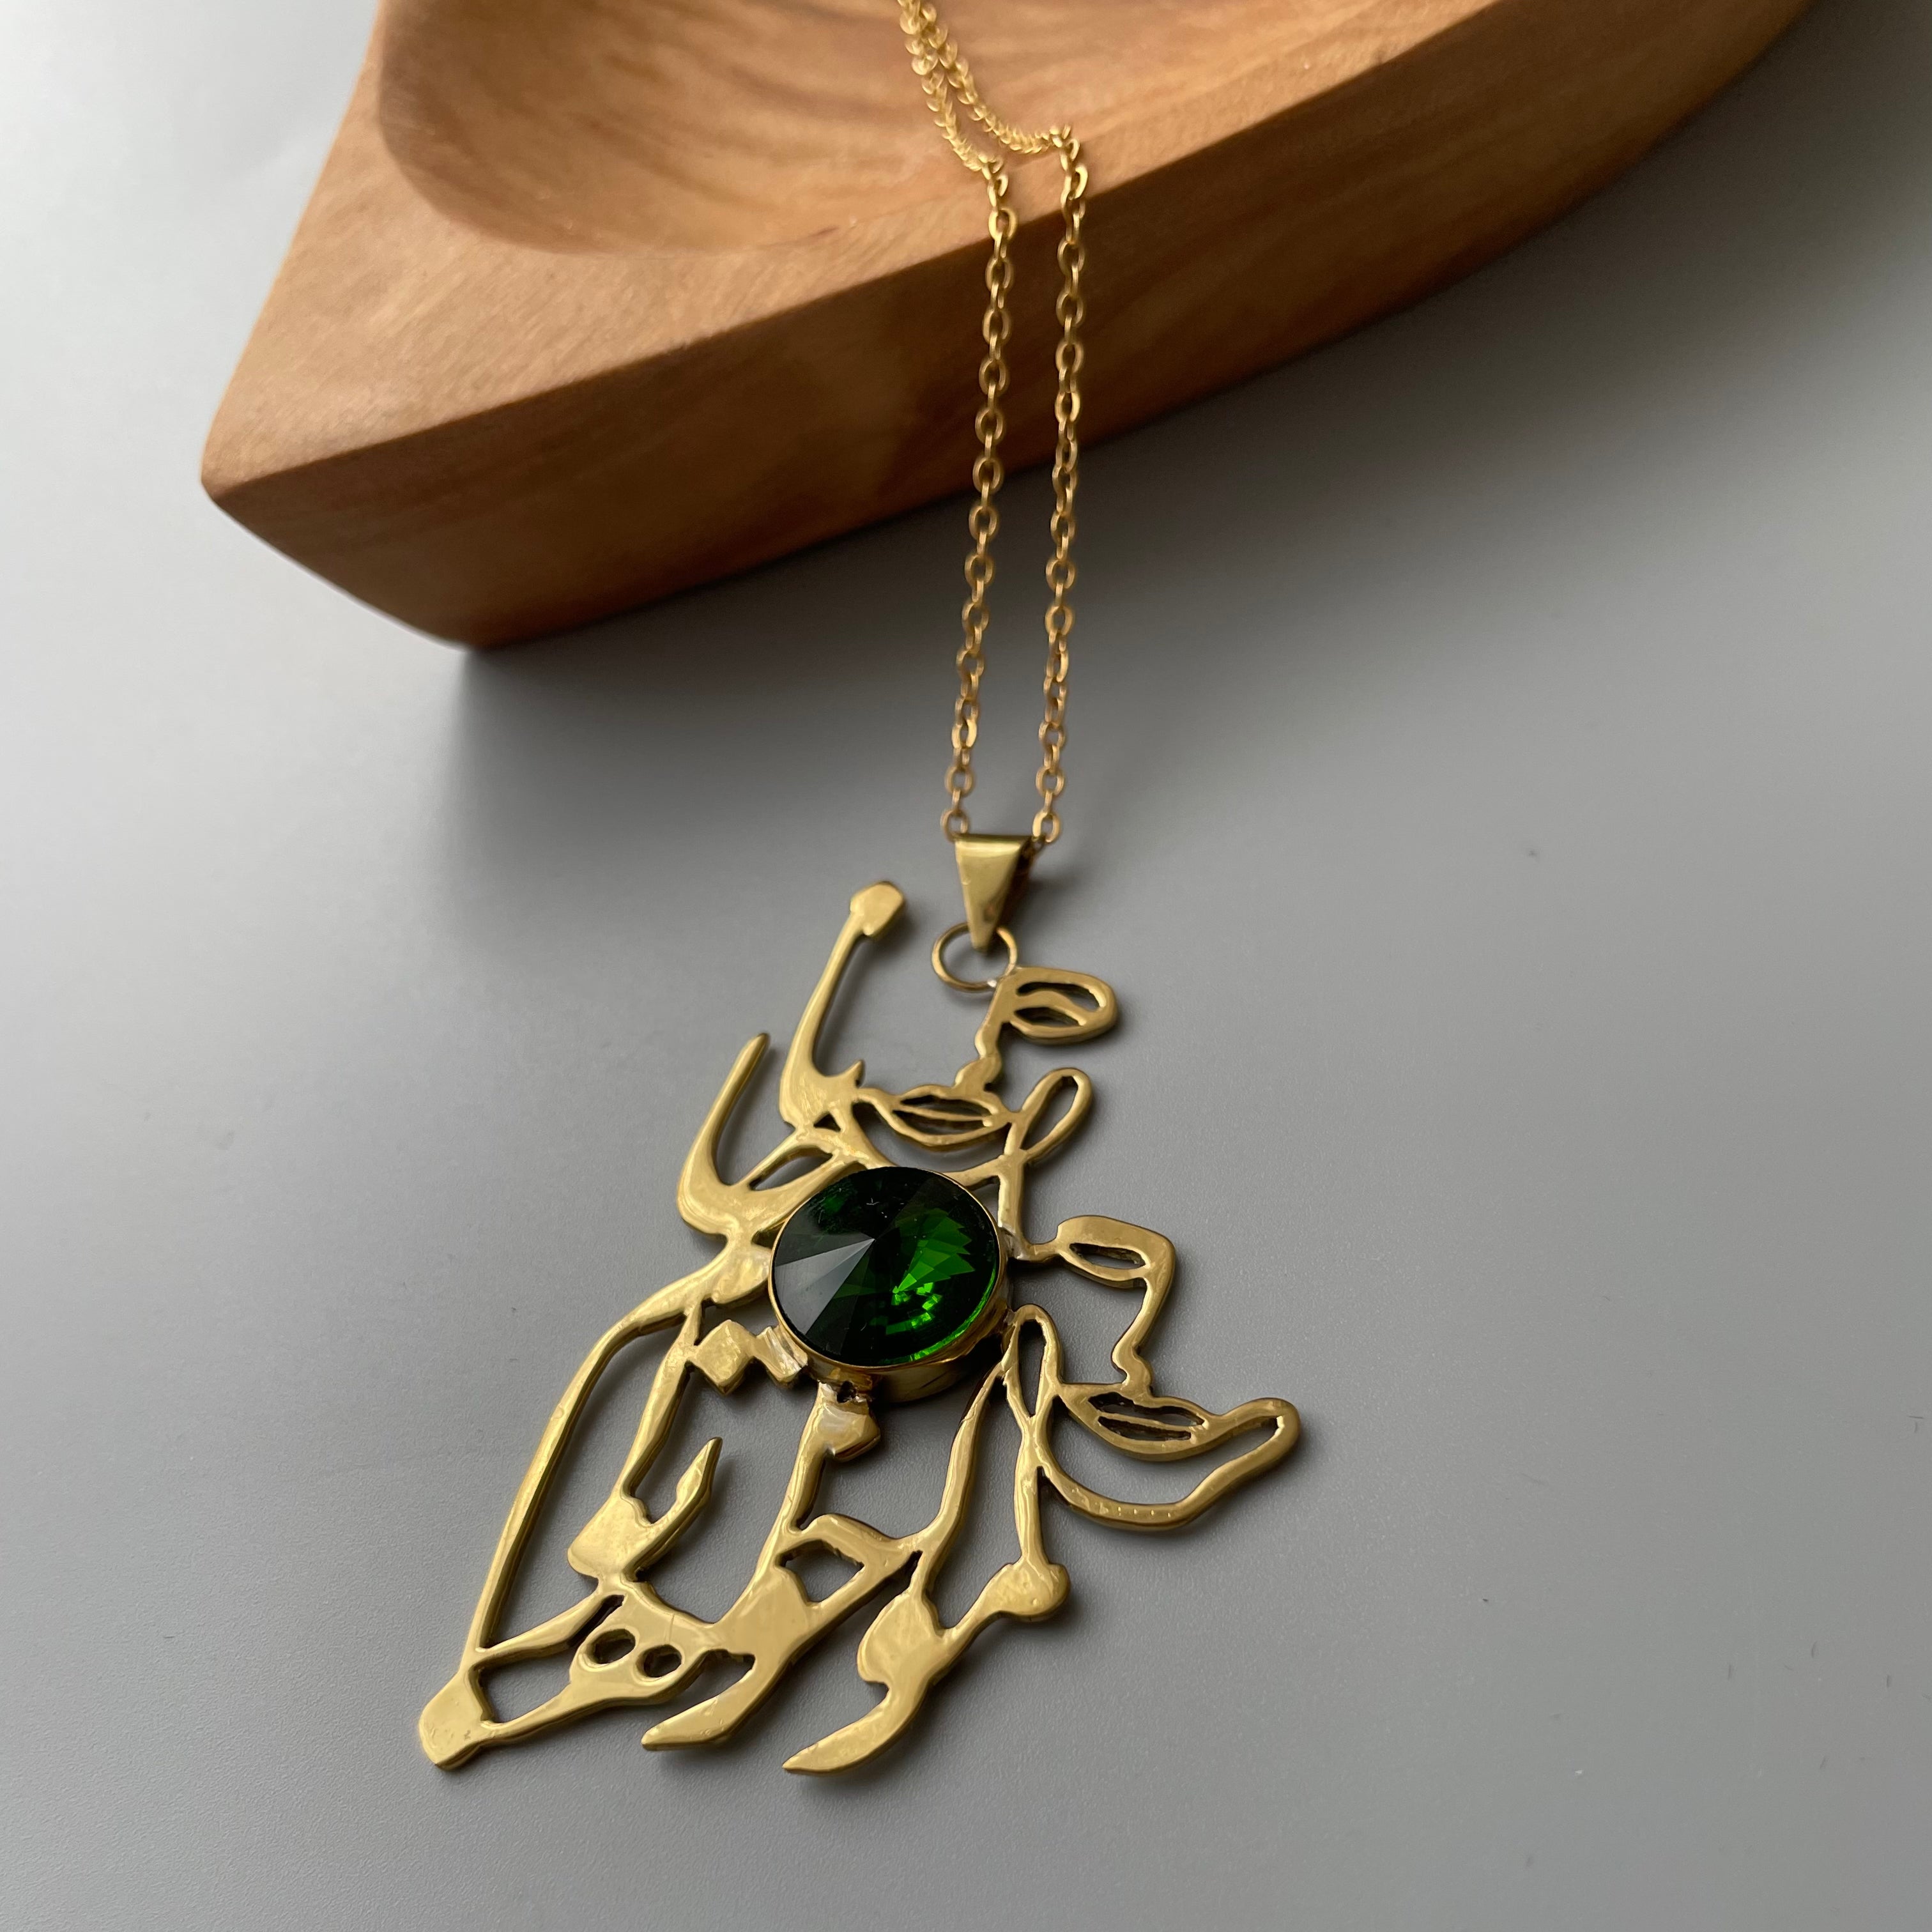 Handmade Brass Necklace with Persian Calligraphy and Shiny Green Crystal